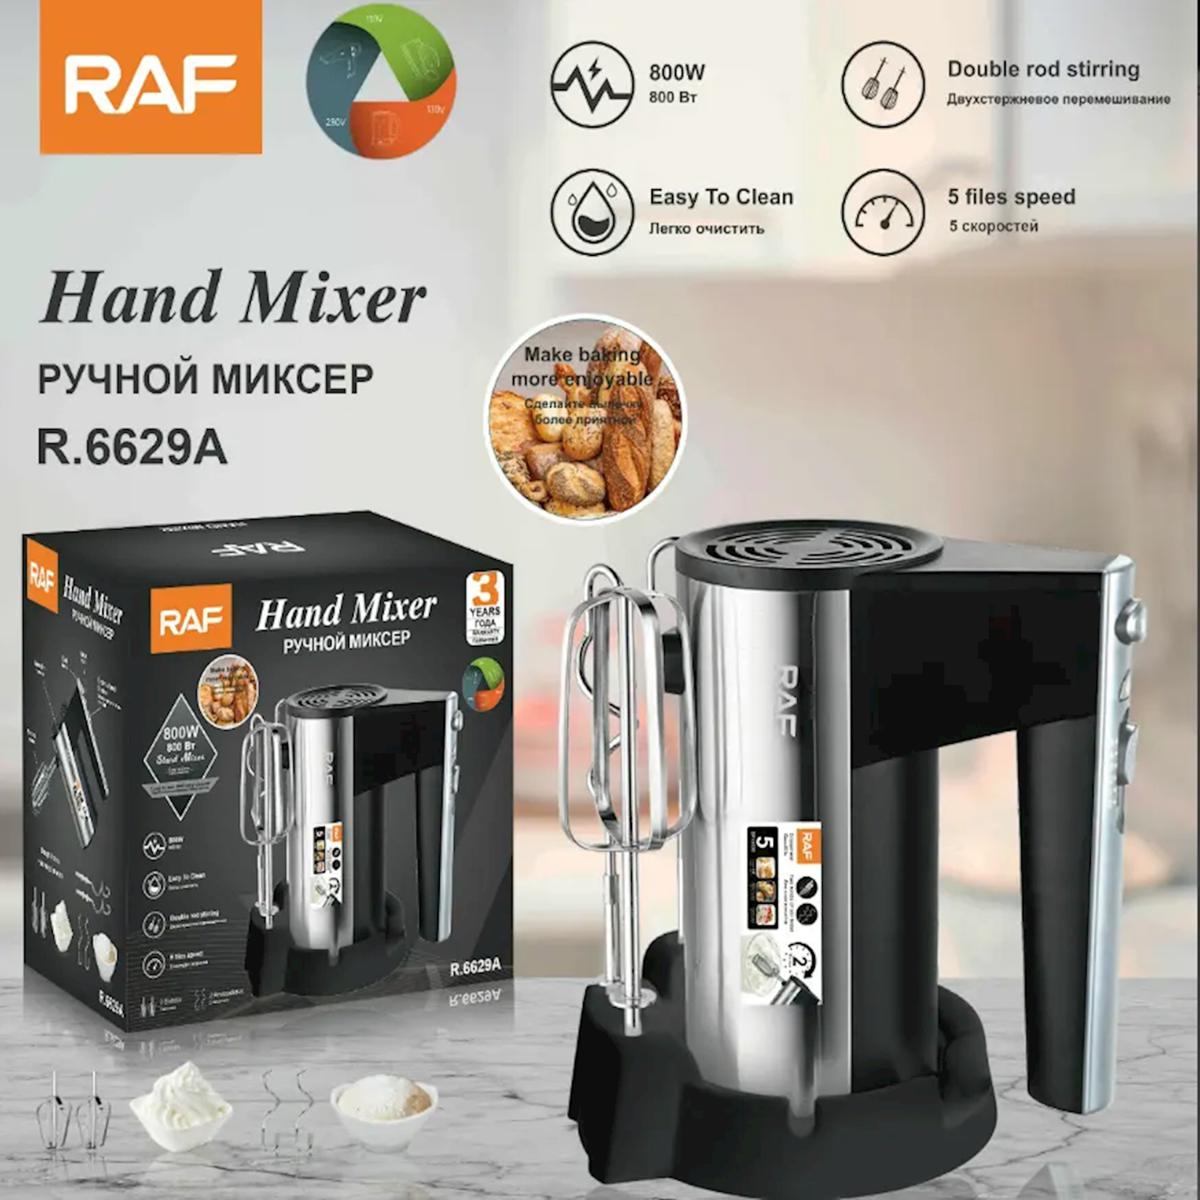 RAF Hand Mixer R.6629A Price in Pakistan